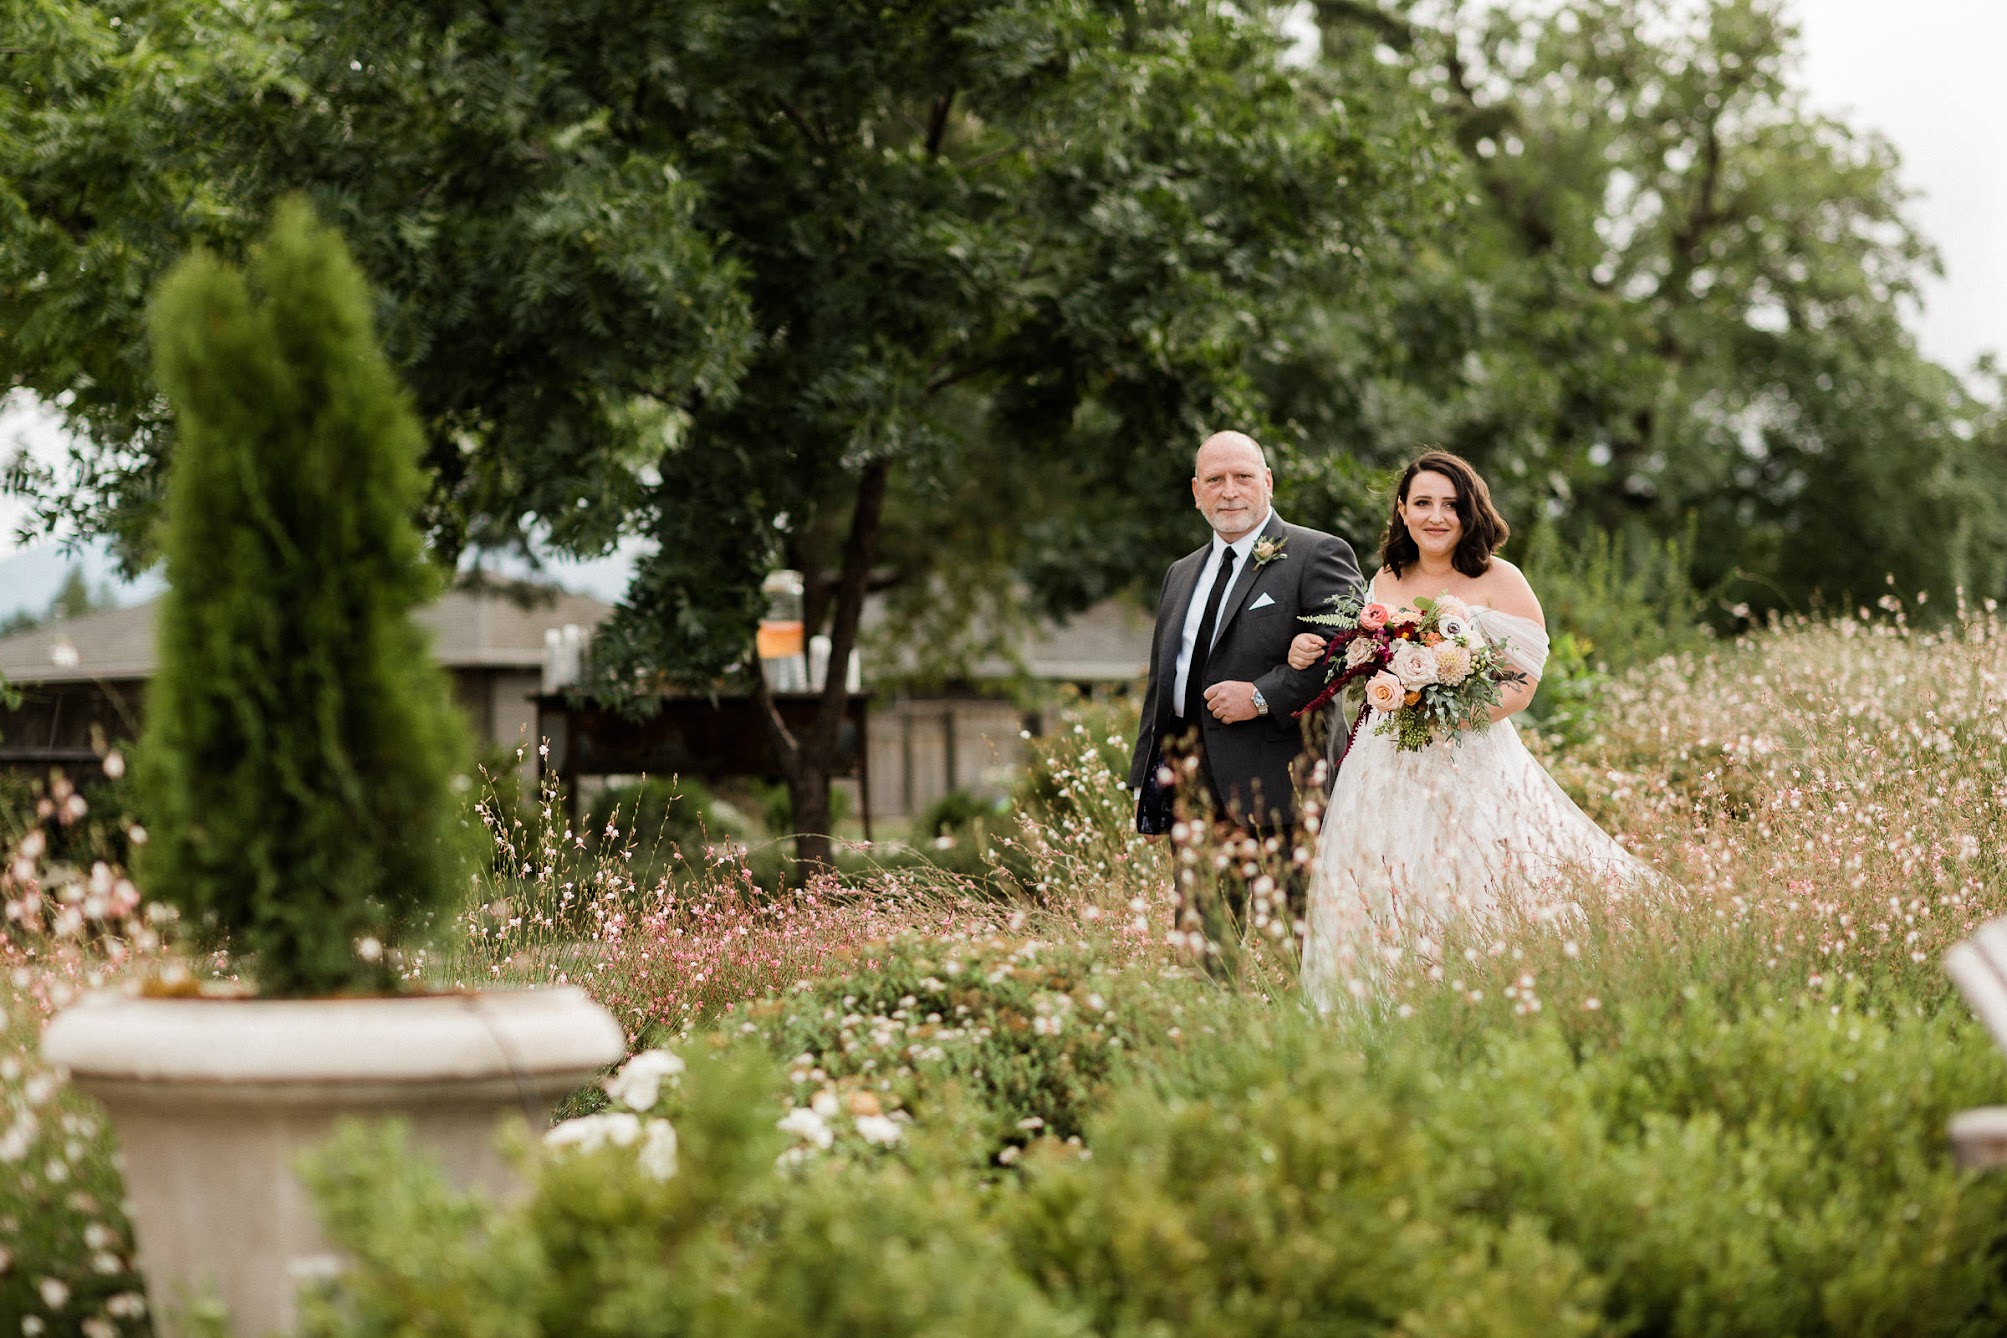 The bride and her father with locked arms walk down the stunning aisle that has natural flowers lining it. 